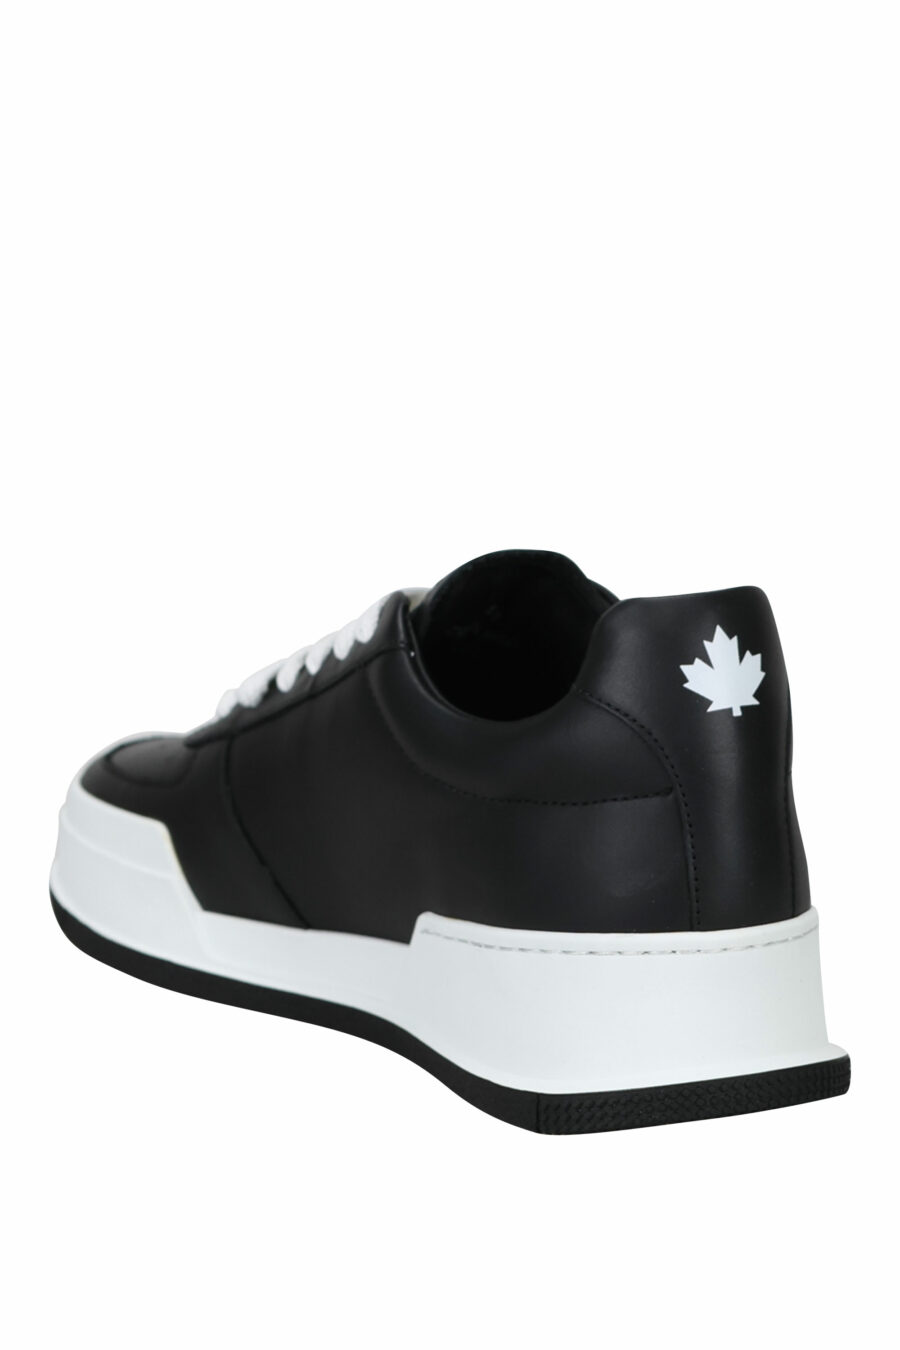 Black trainers with "icon" logo and white sole - 8055777248911 3